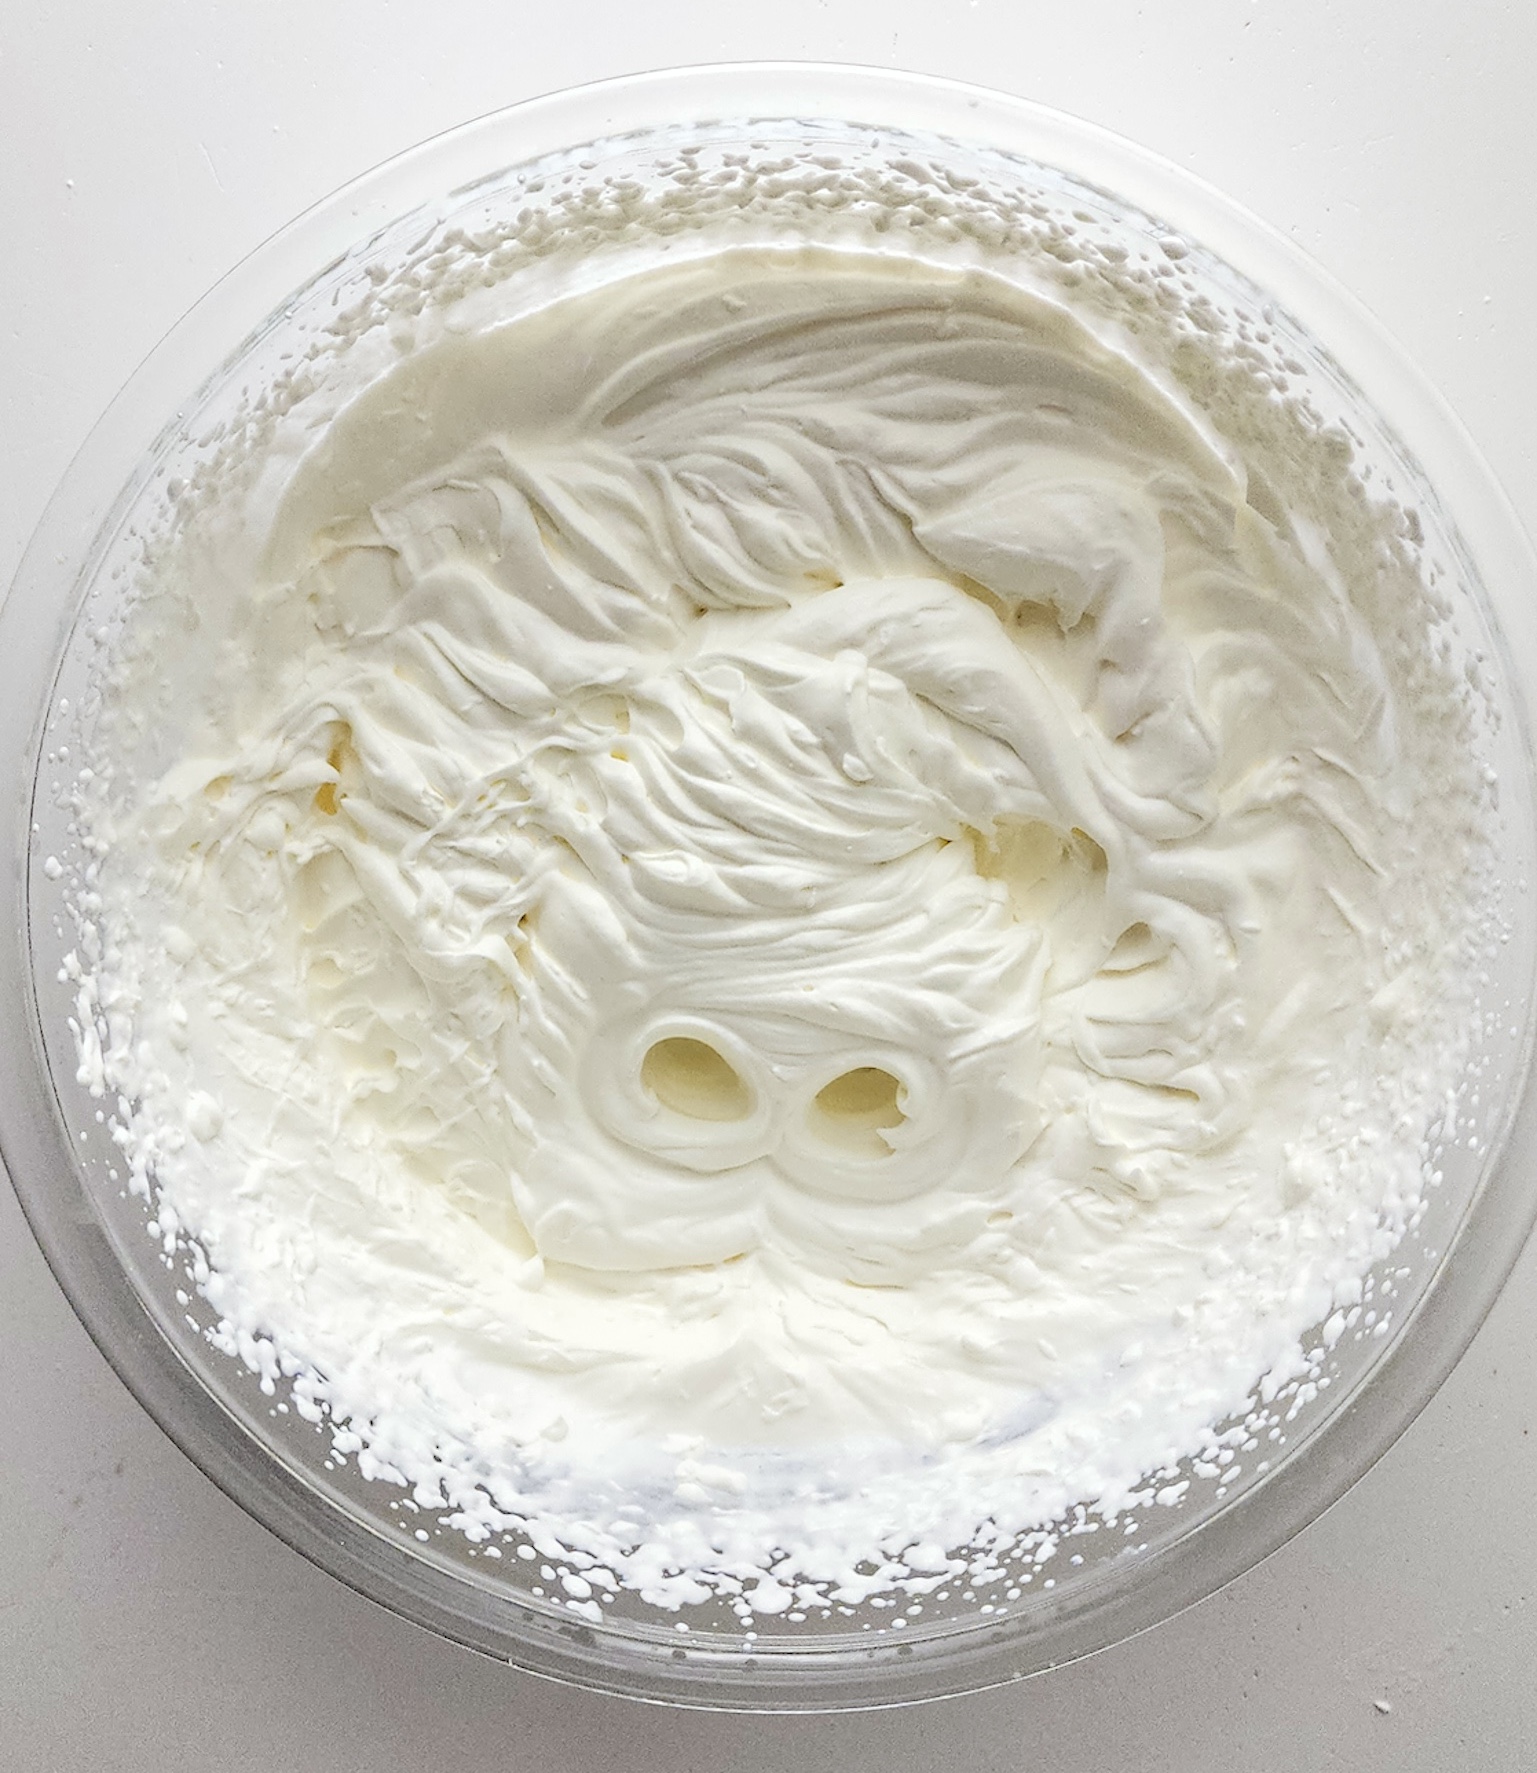 Heavy cream whipped until stiff peaks have formed